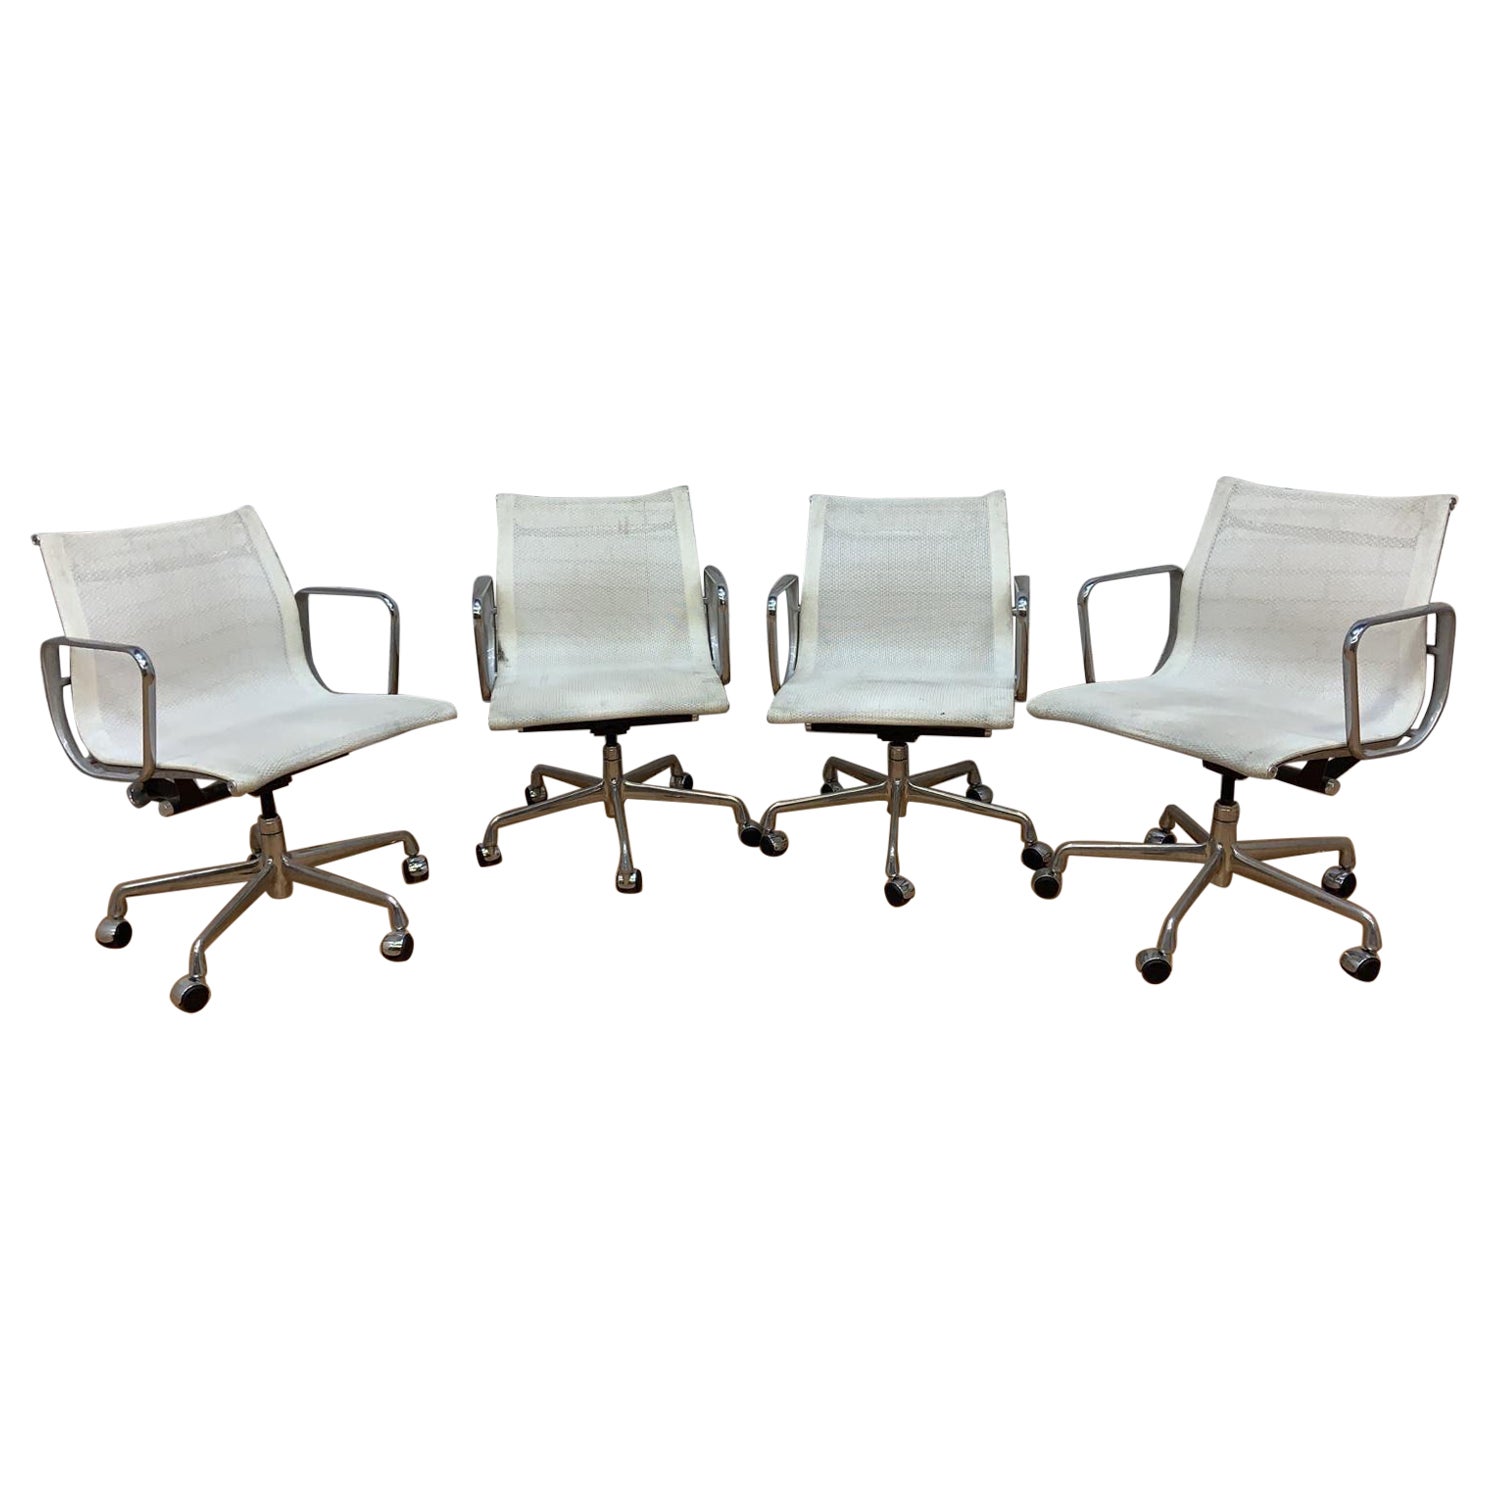 MCM Herman Miller Style Low Back White Mesh Office Chairs, Set of 4